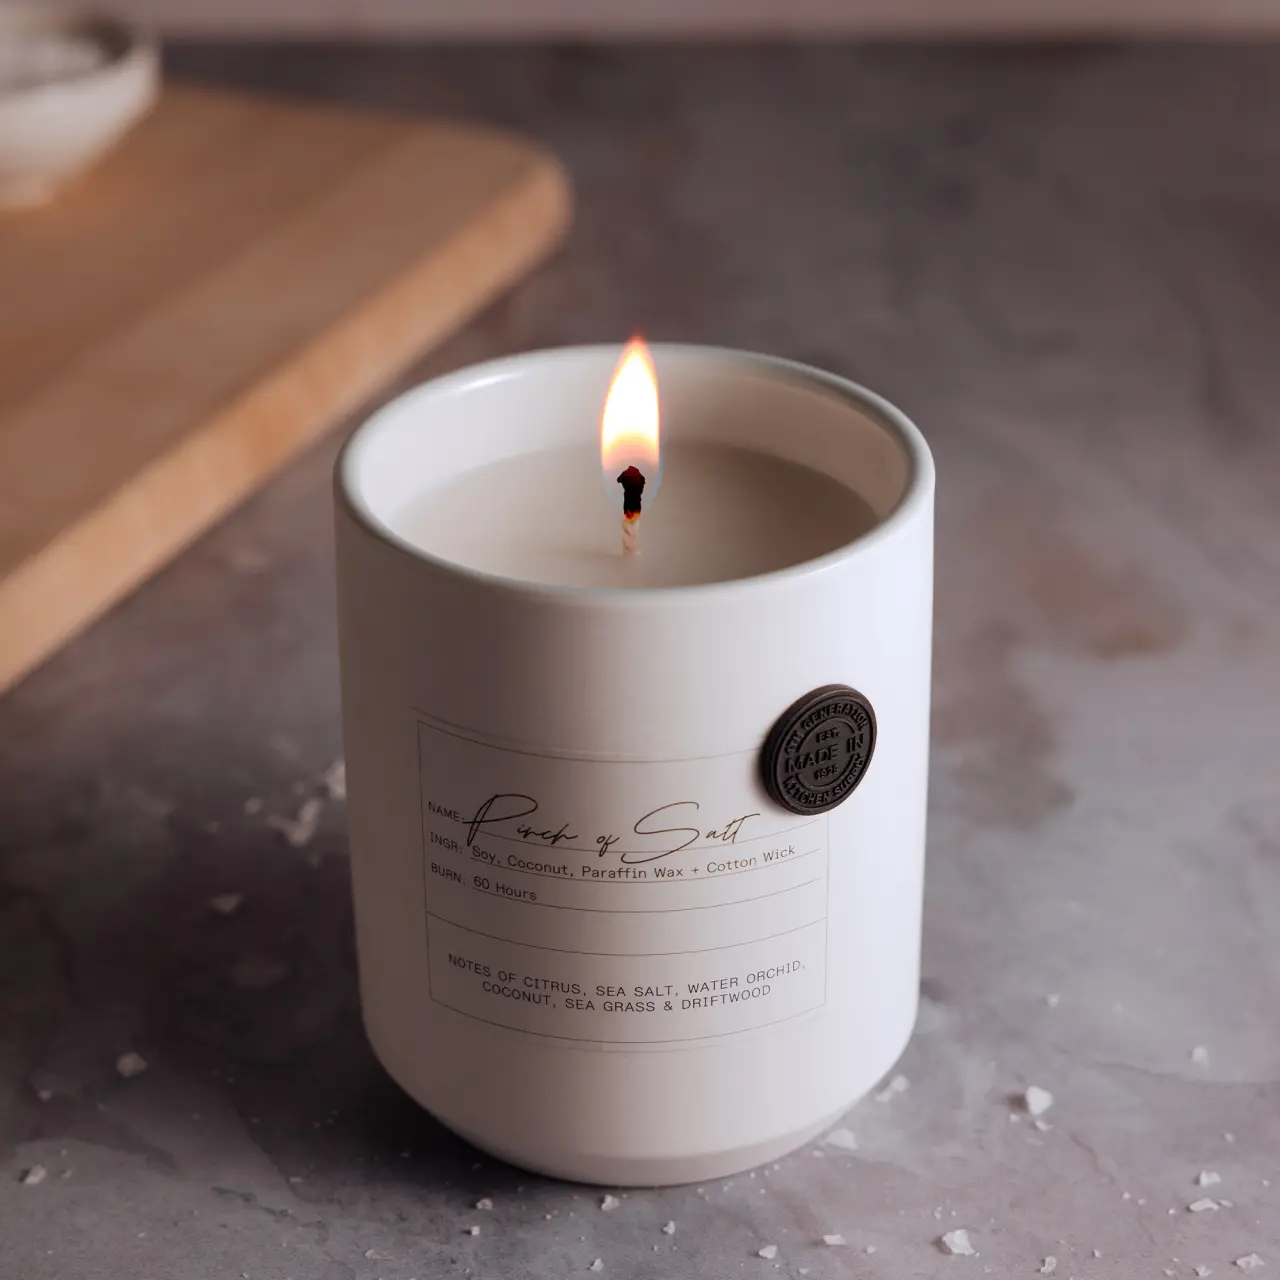 A lit scented candle with a tranquil flame and visible brand label rests on a muted surface.